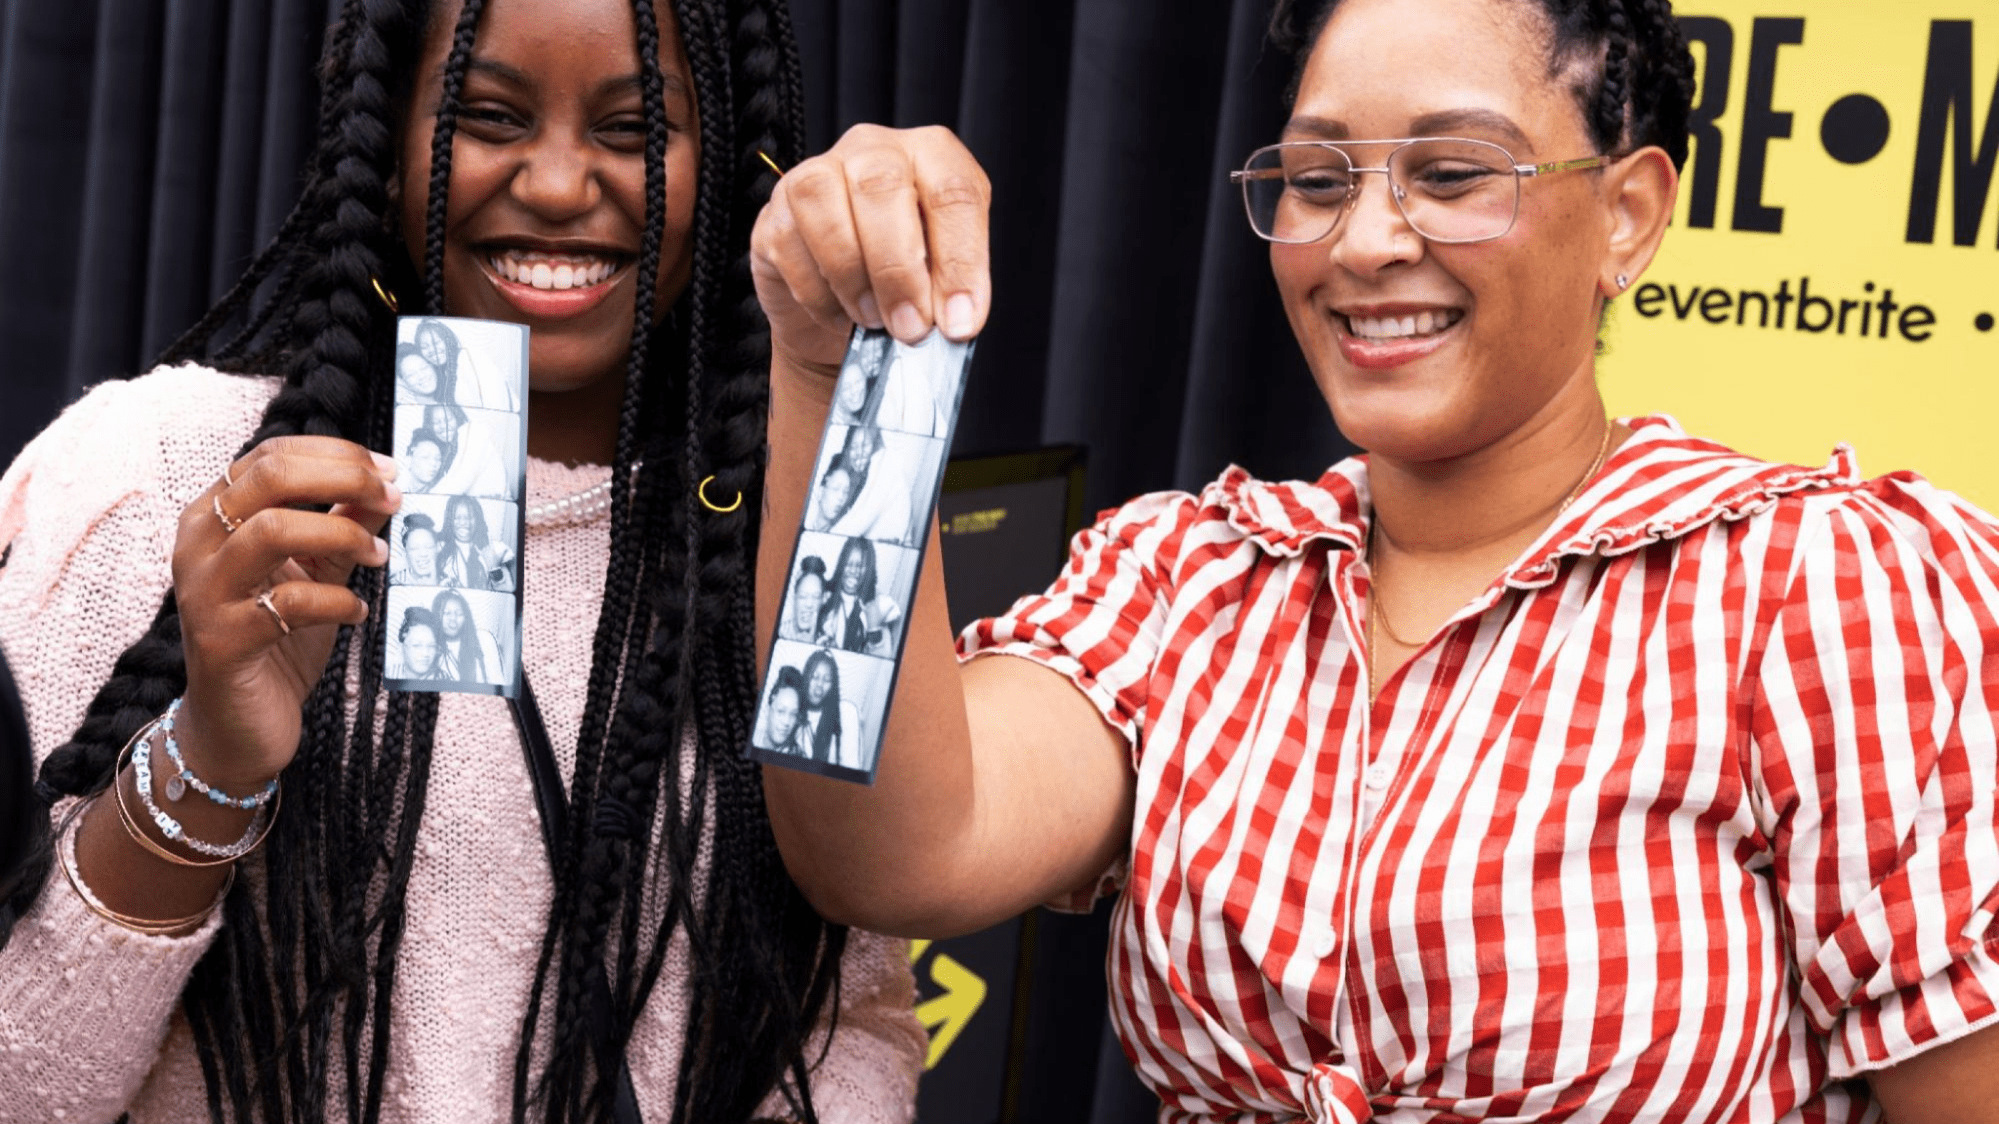 Two event attendees smile holding printed photos